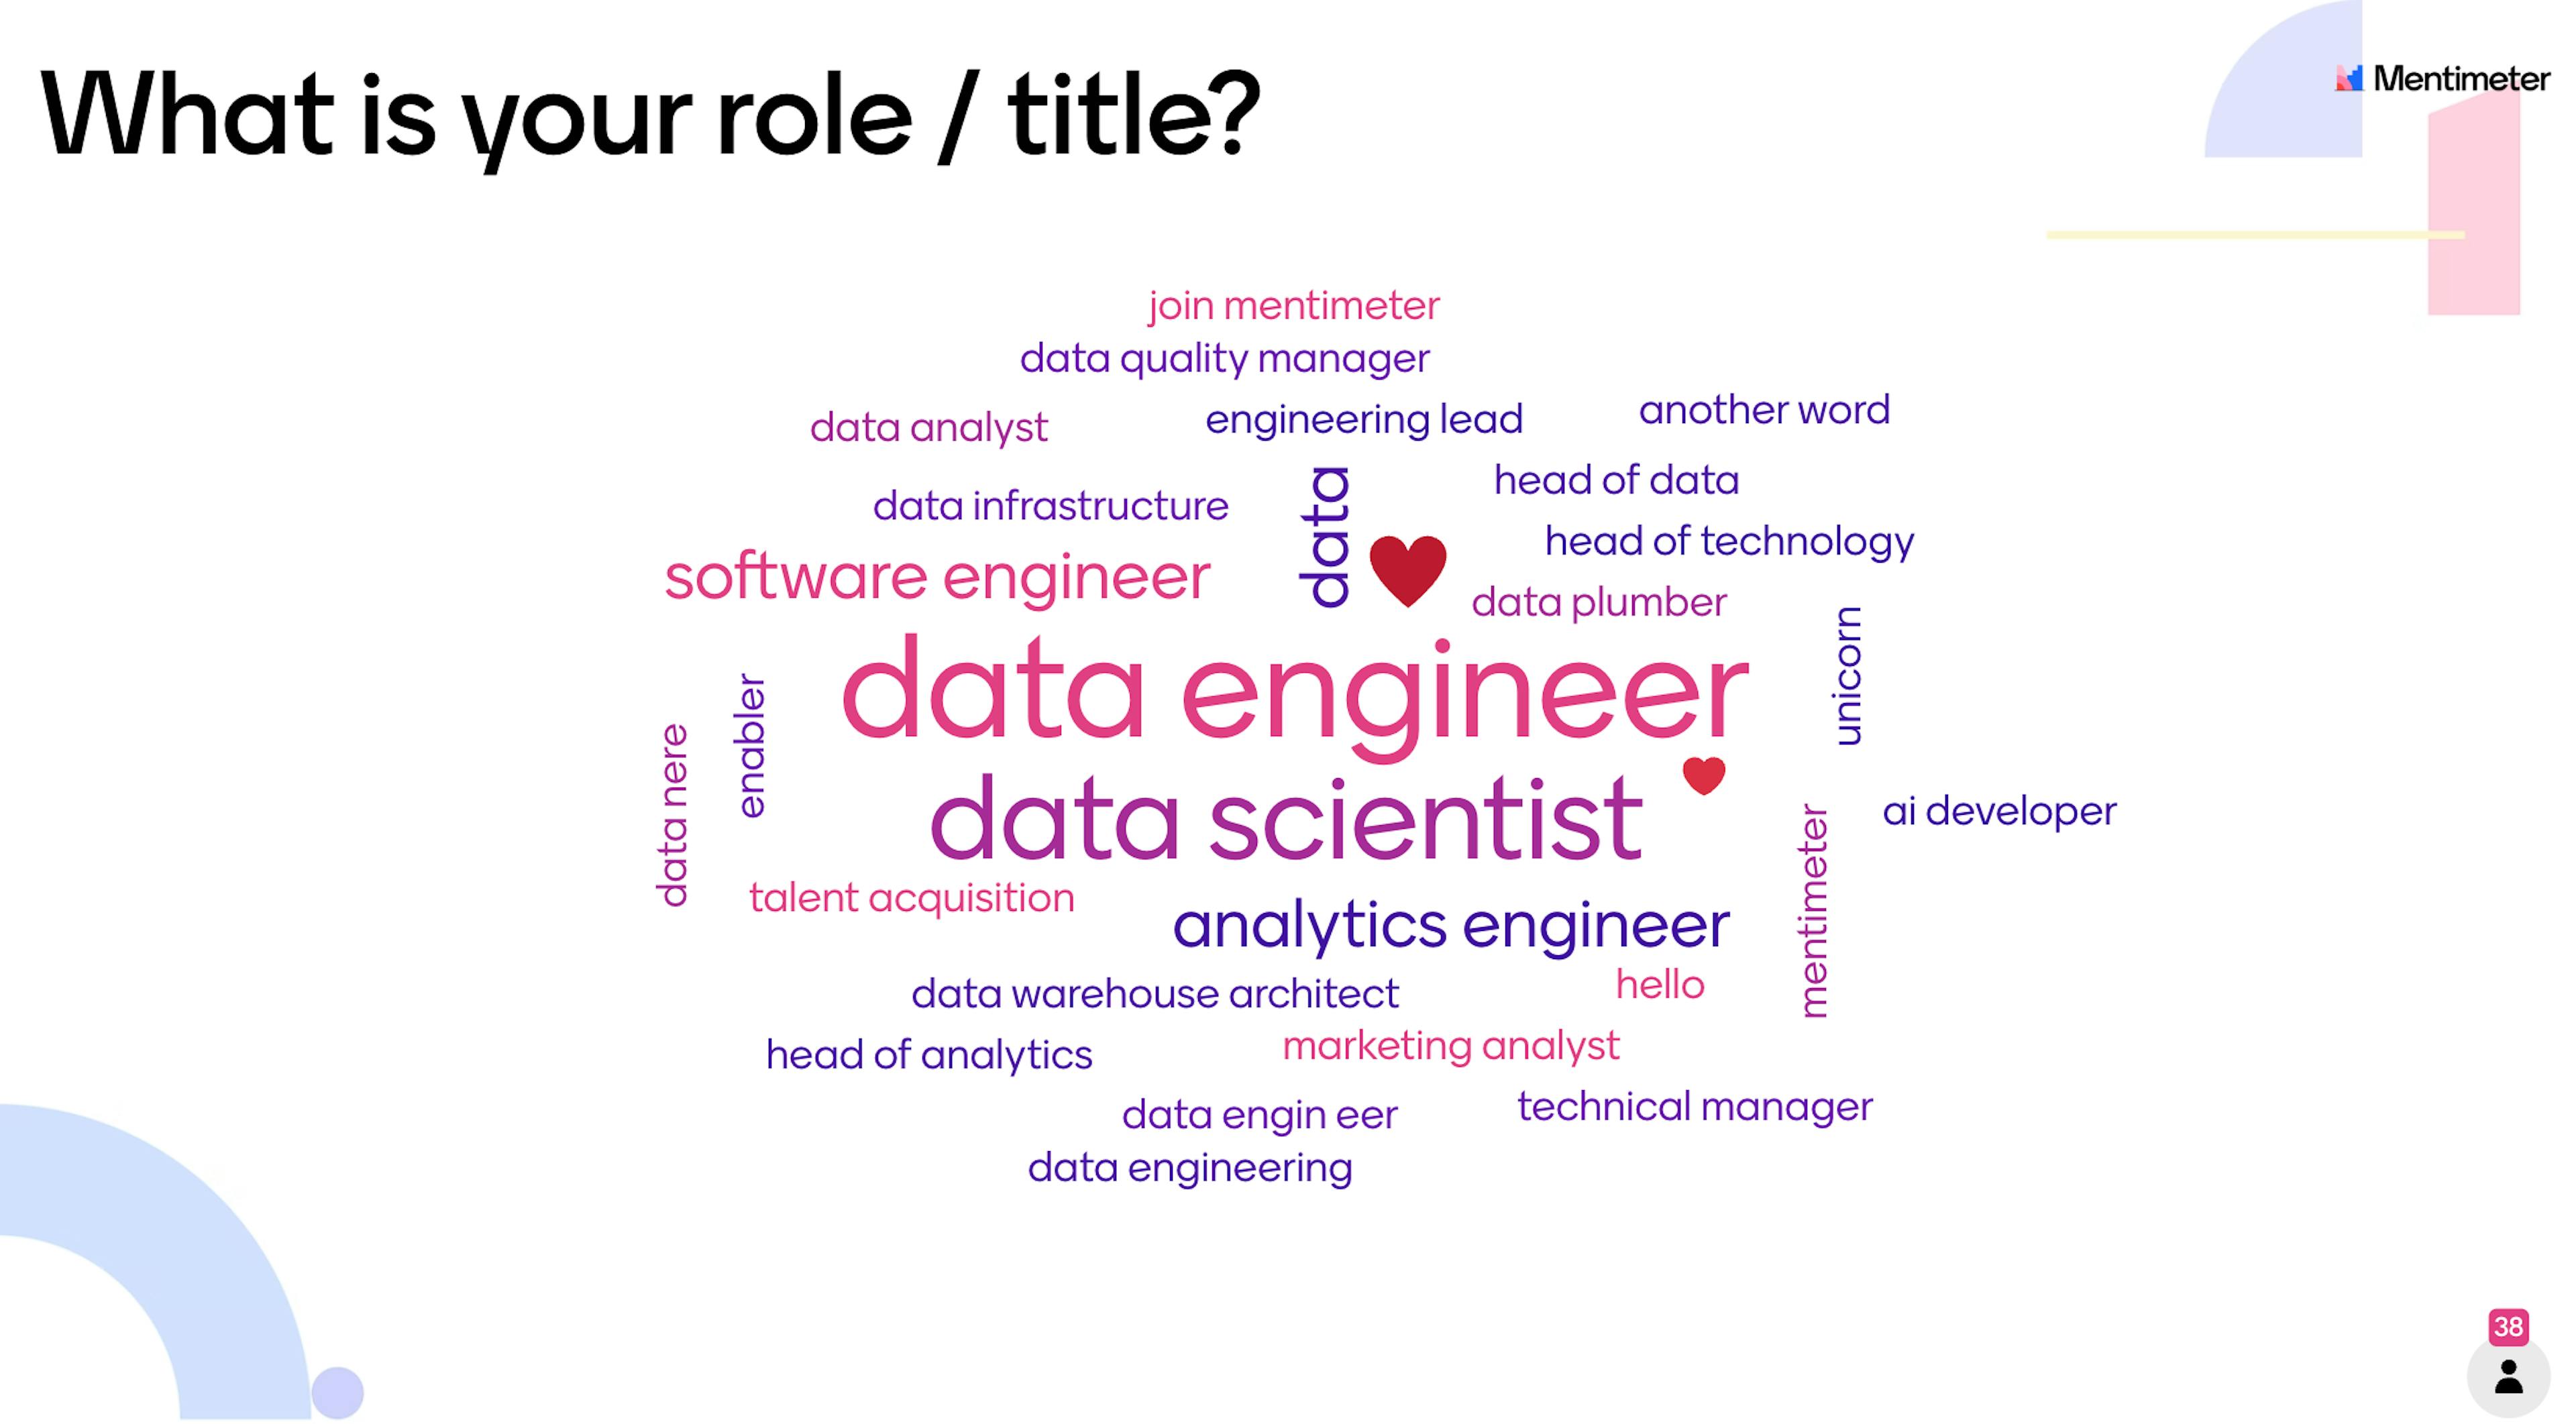 Word cloud of the roles and titles present at the Heroes of Data meetup at Mentimeter.